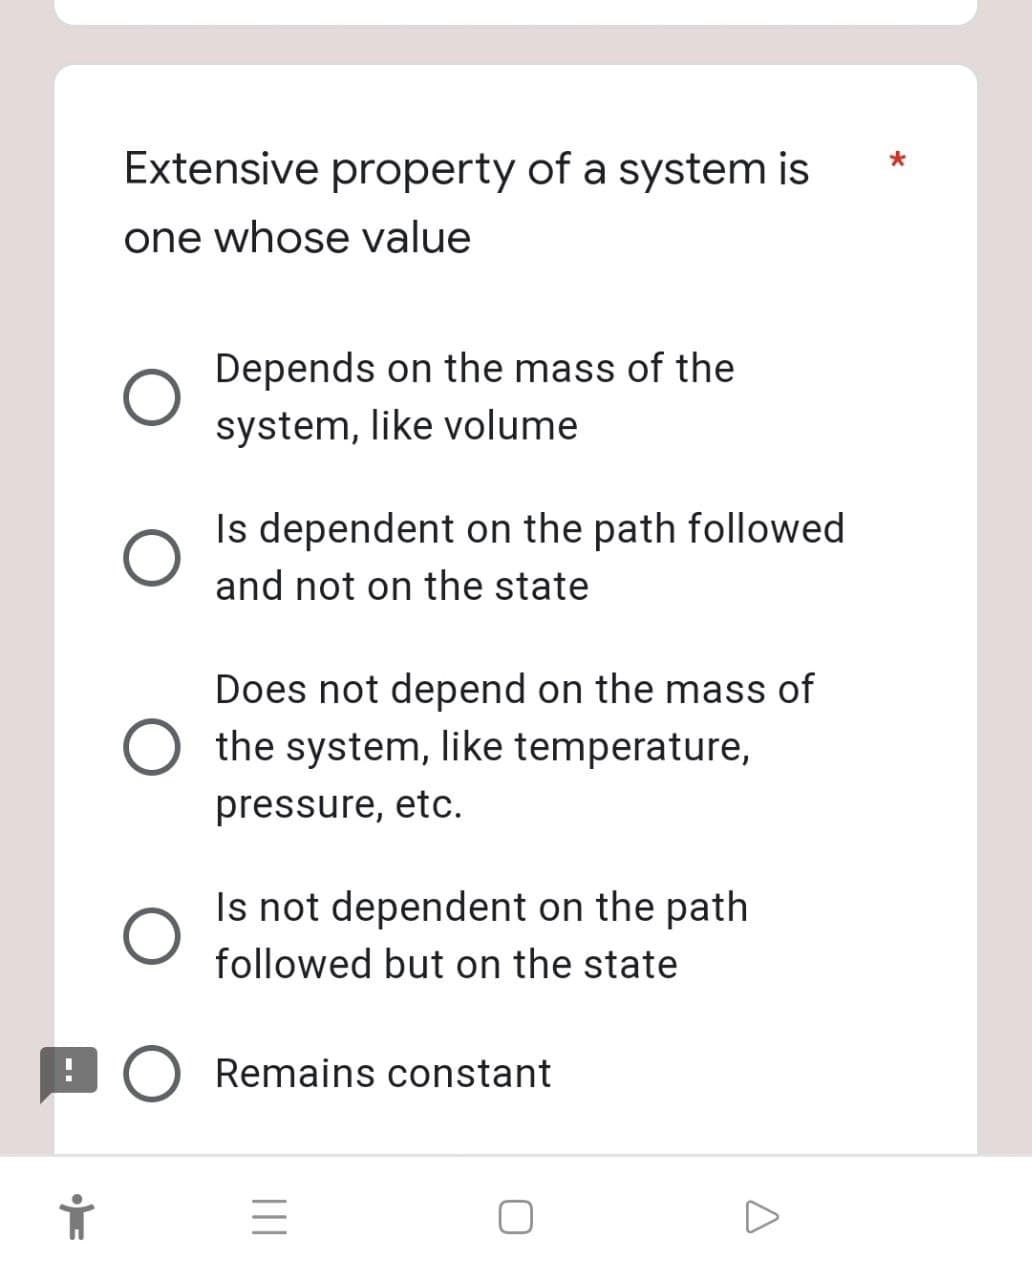 Extensive property of a system is
one whose value
O
Depends on the mass of the
system, like volume
Is dependent on the path followed
and not on the state
Does not depend on the mass of
the system, like temperature,
pressure, etc.
Is not dependent on the path
followed but on the state
O Remains constant
||||
=